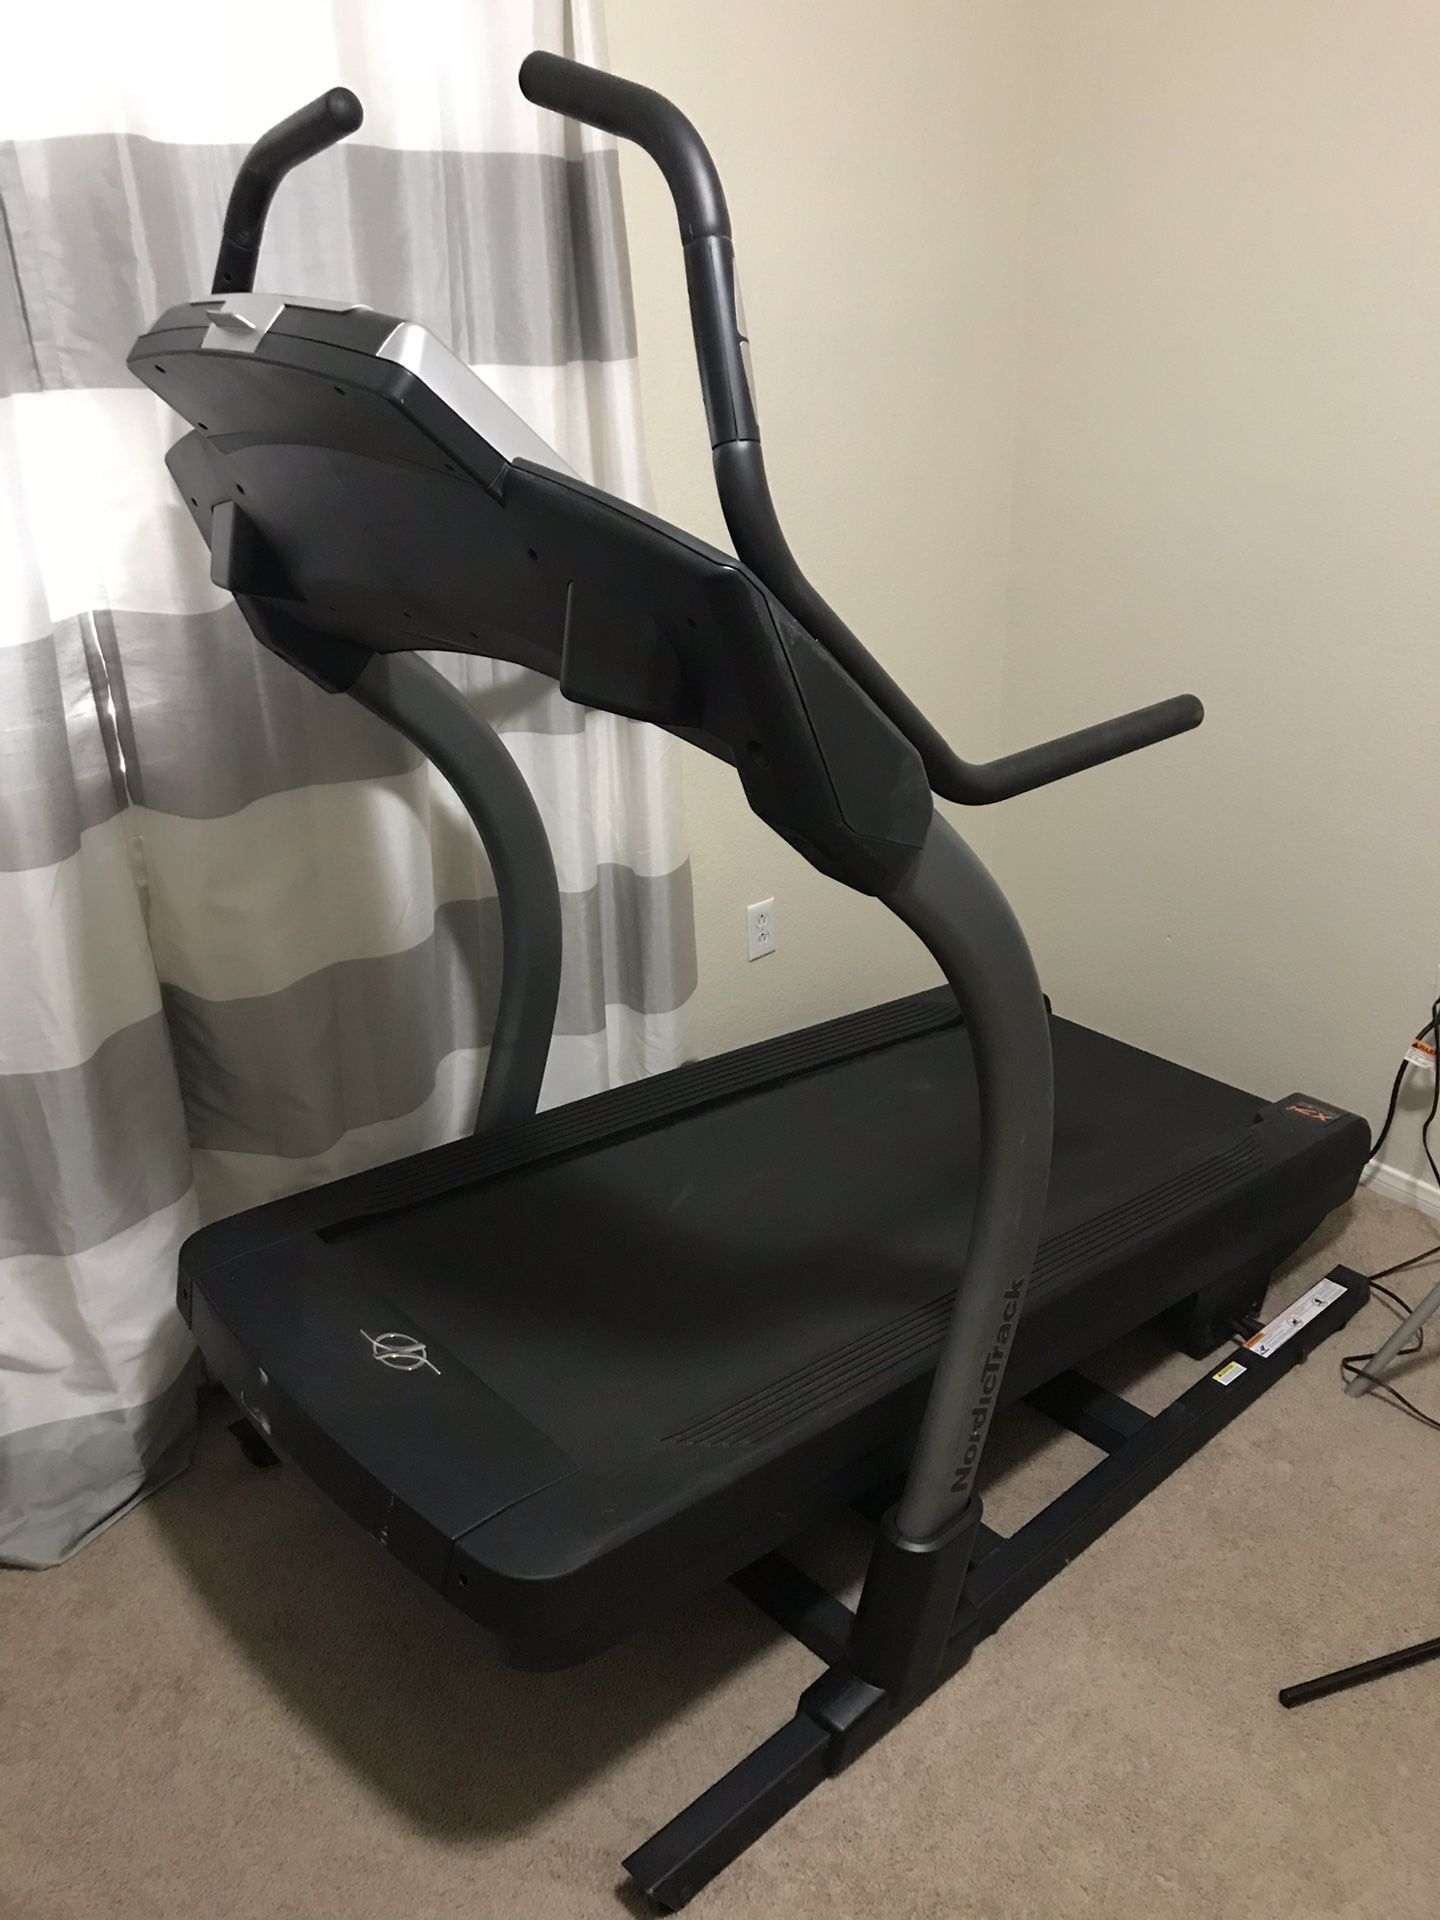 NordicTrack Treadmill For Sale - Barely Used - Excellent Condition! - (Southeast)